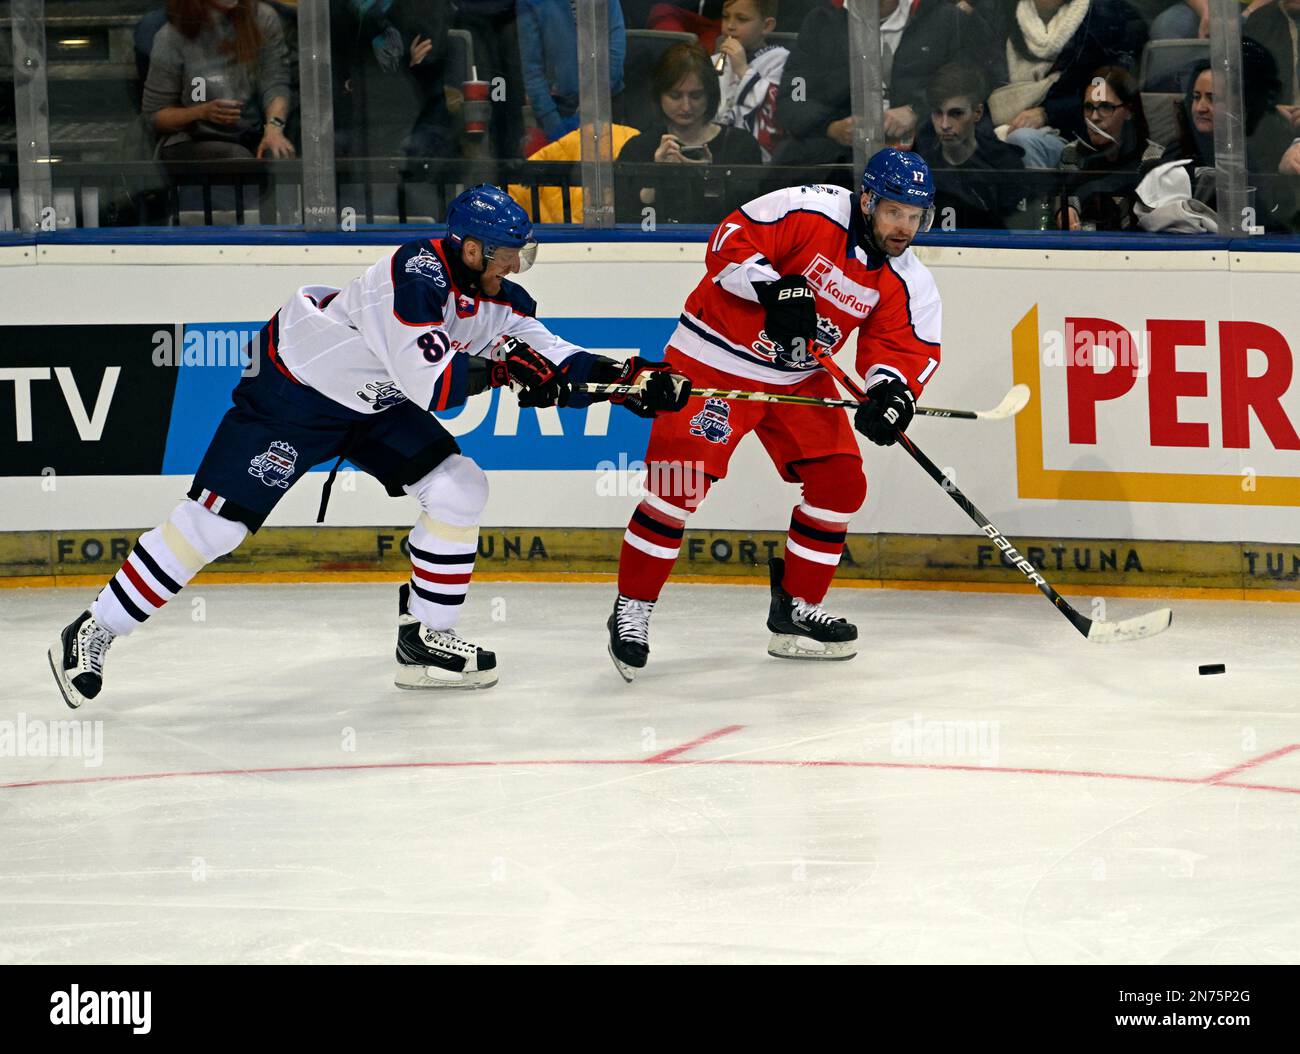 Prague, Czech Republic. 10th Feb, 2023. Marian Hossa of Slovakia, left, and Jaroslav Hlinka of Czech Republic in action during the hockey match of legends Czech Republic vs Slovakia in Prague, Czech Republic, February 10, 2023. The match is part of the celebration of the 25th anniversary of the Czech team's victory at the 1998 Winter Olympic Games in Nagano. Credit: Katerina Sulova/CTK Photo/Alamy Live News Stock Photo